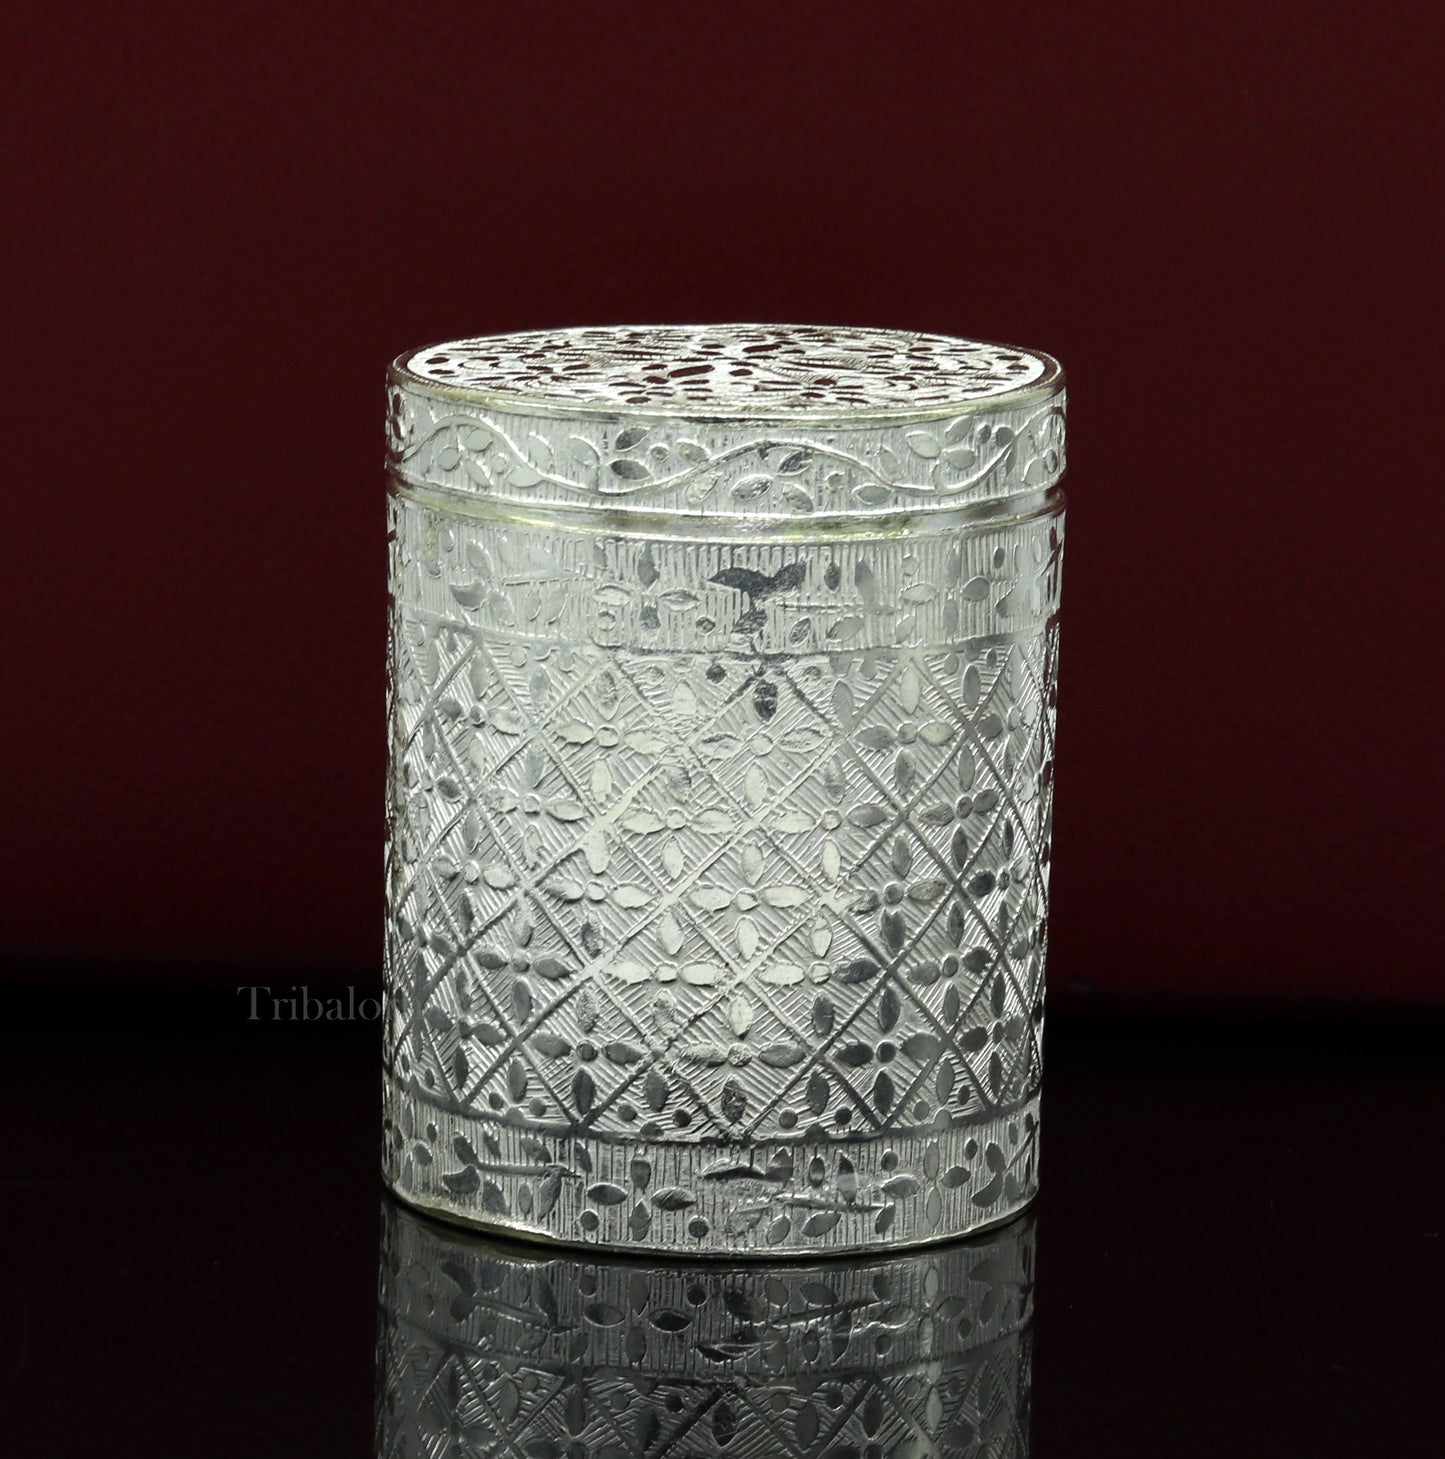 6.5cm 925 solid silver utensils vintage style trinket box, container/casket box bridal floral work box, jewelry box silver utensils stb311 - TRIBAL ORNAMENTS